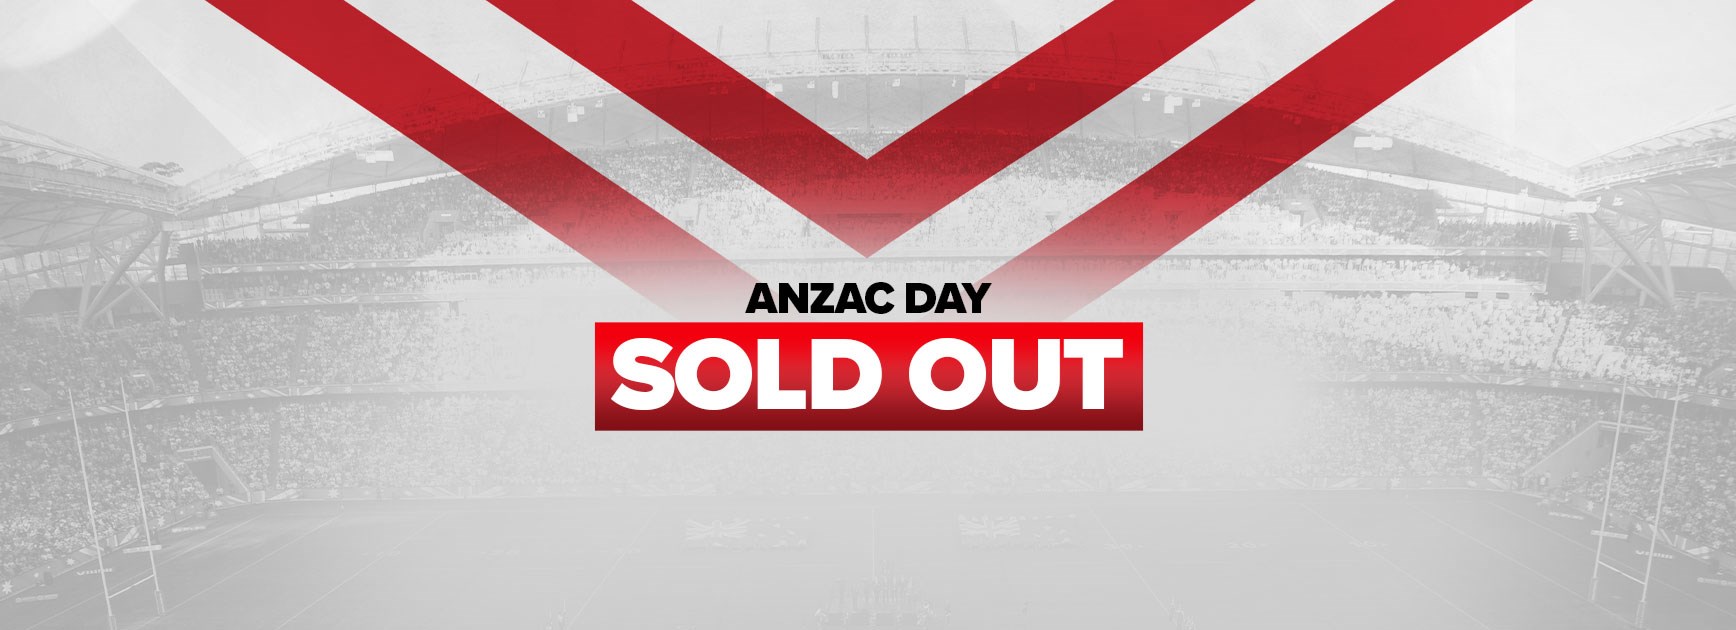 Anzac Day officially sold out